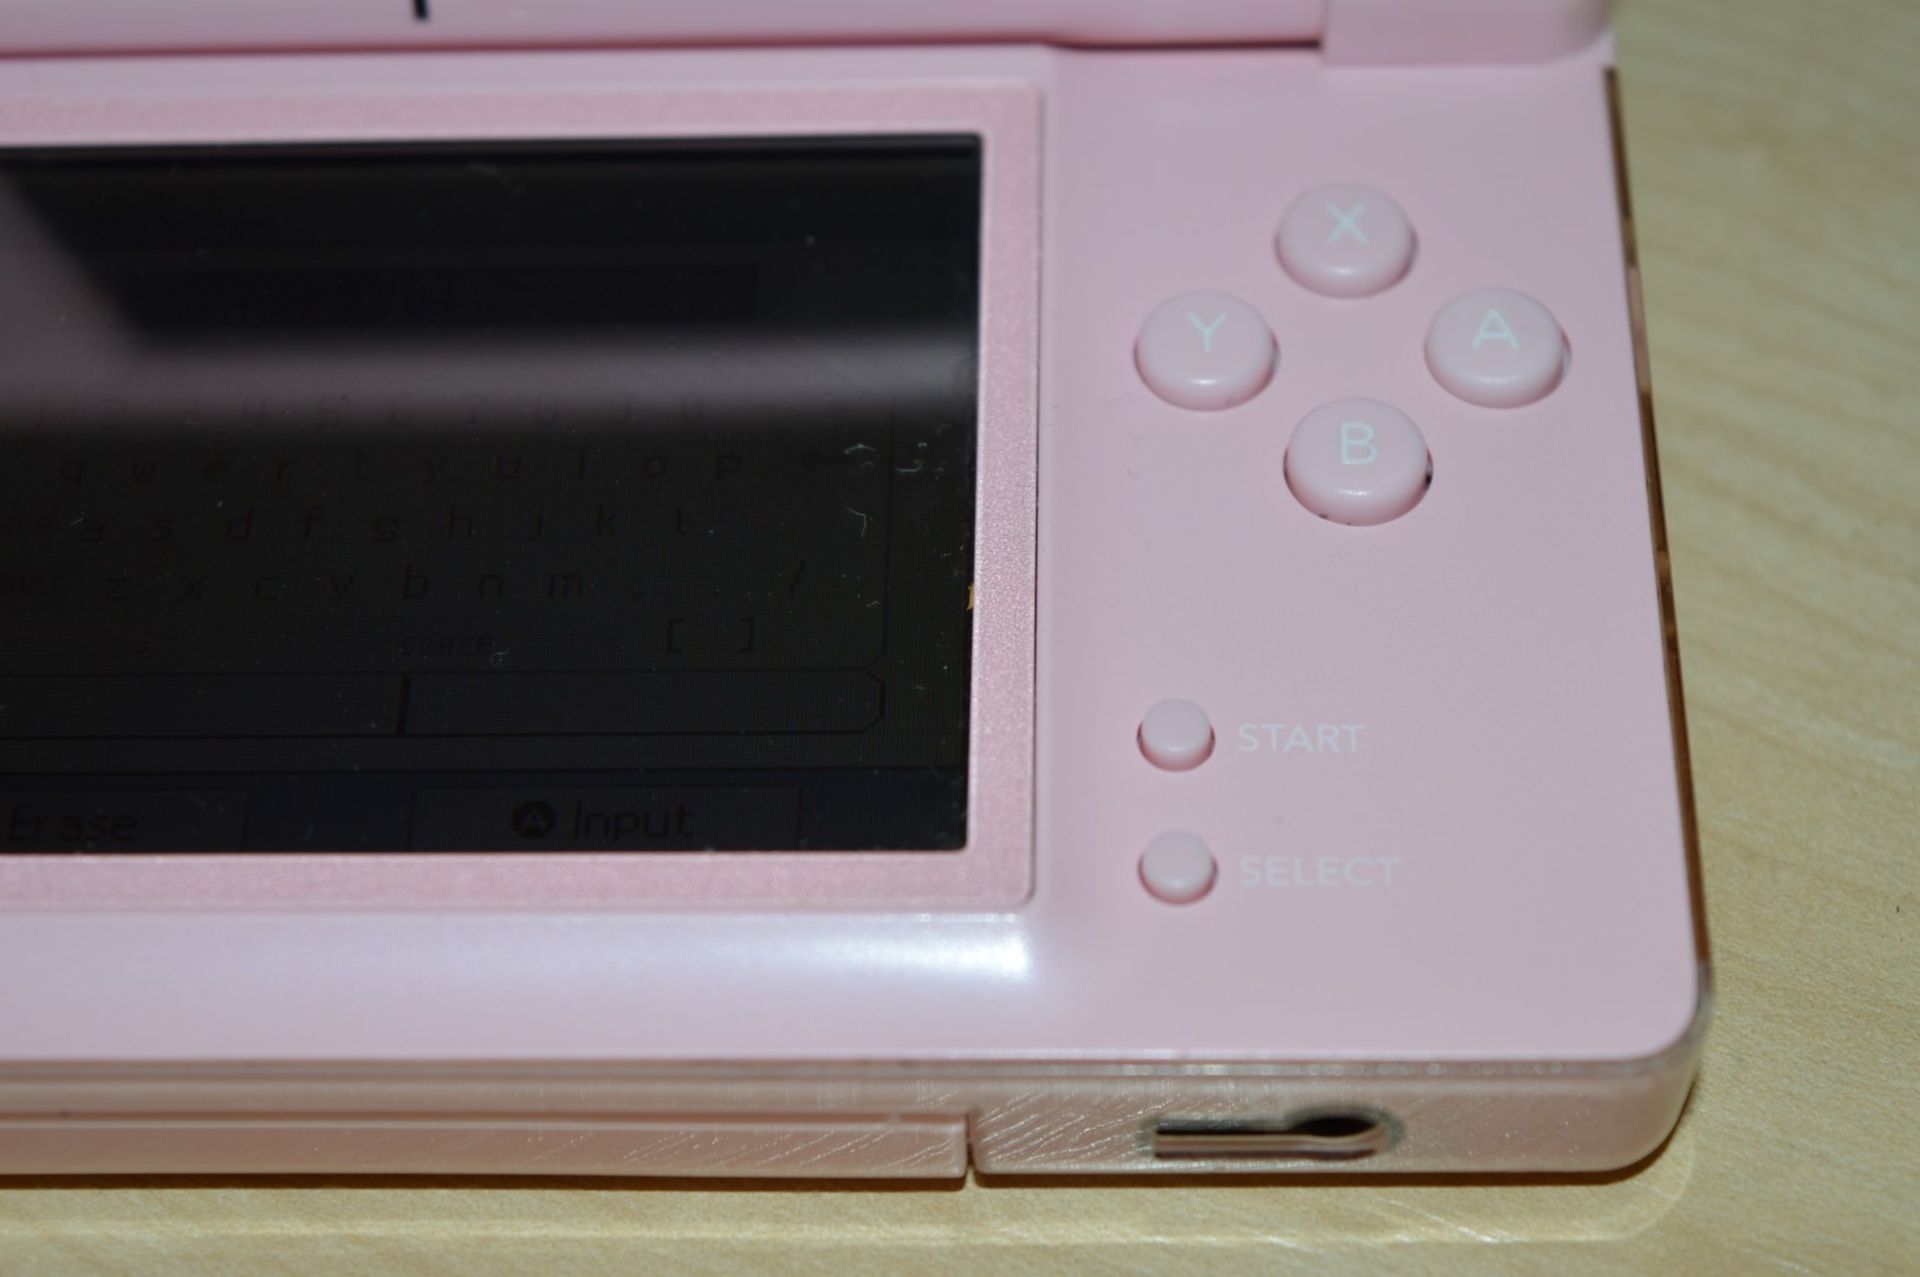 1 x Pink Nintendo DS Lite With High School Musical 2 Game - Includes Touch Pen and Charger - Good - Image 5 of 8